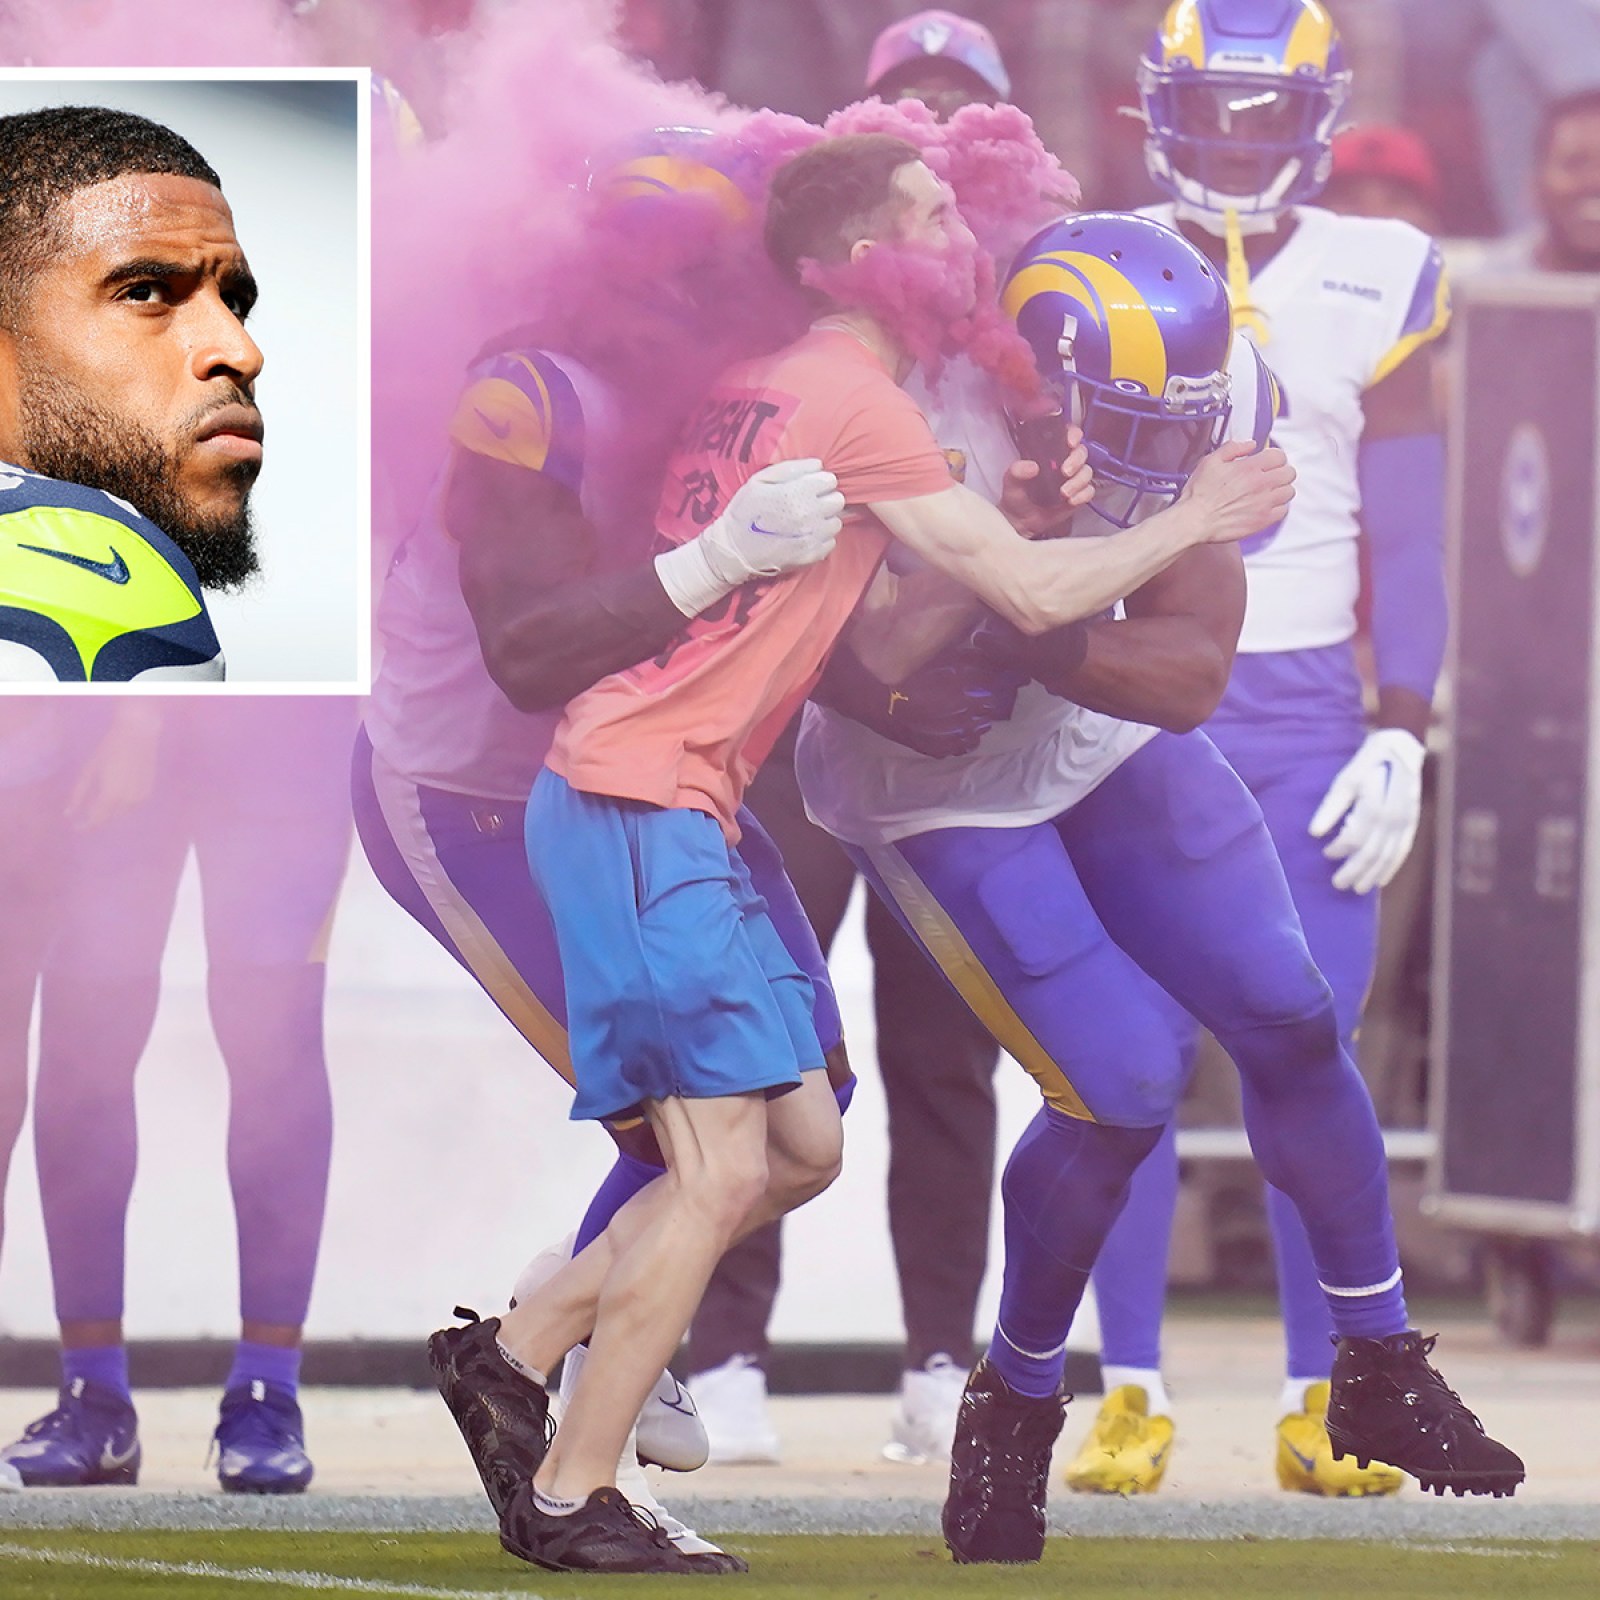 Video of Rams' Bobby Wagner Tackling Fan Viewed Over 6 Million Times